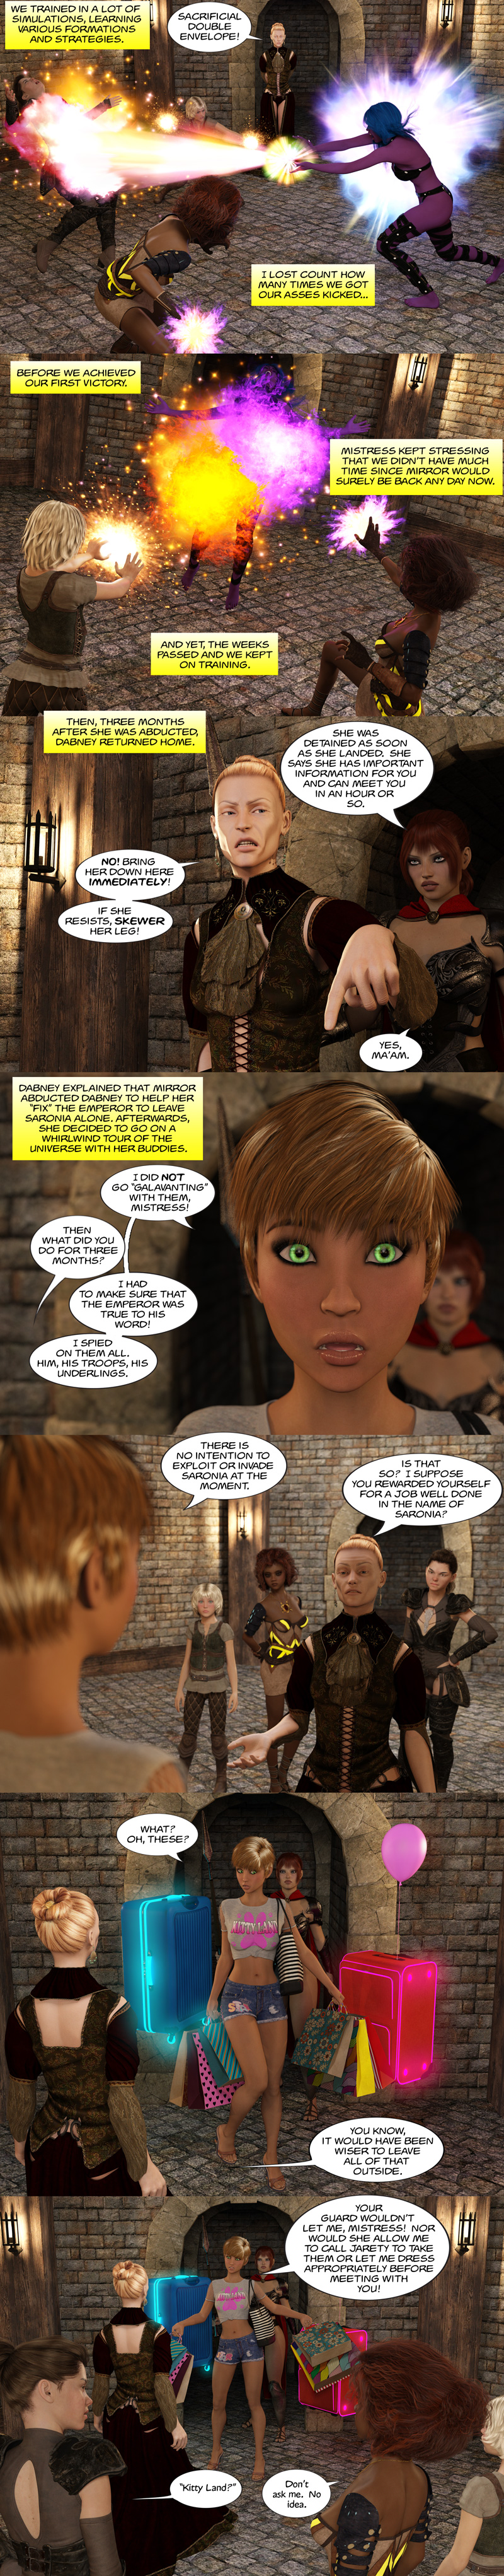 Chapter 16, page 5 – sacrificial double envelope and Dabney comes back